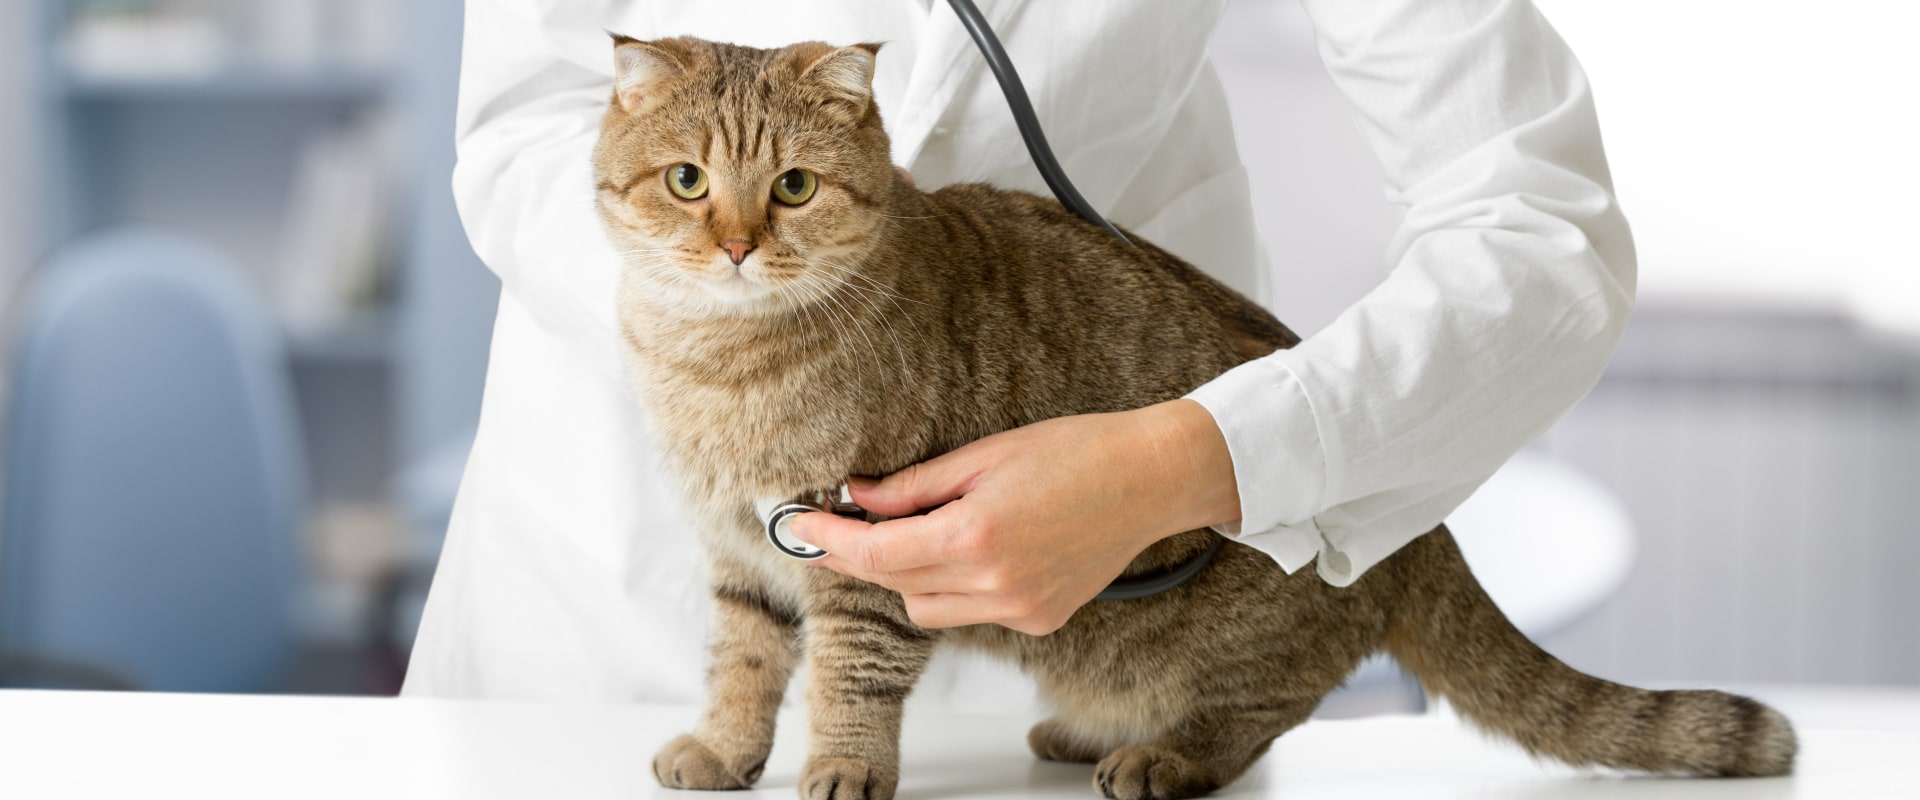 Veterinary Tests and Procedures for Cats